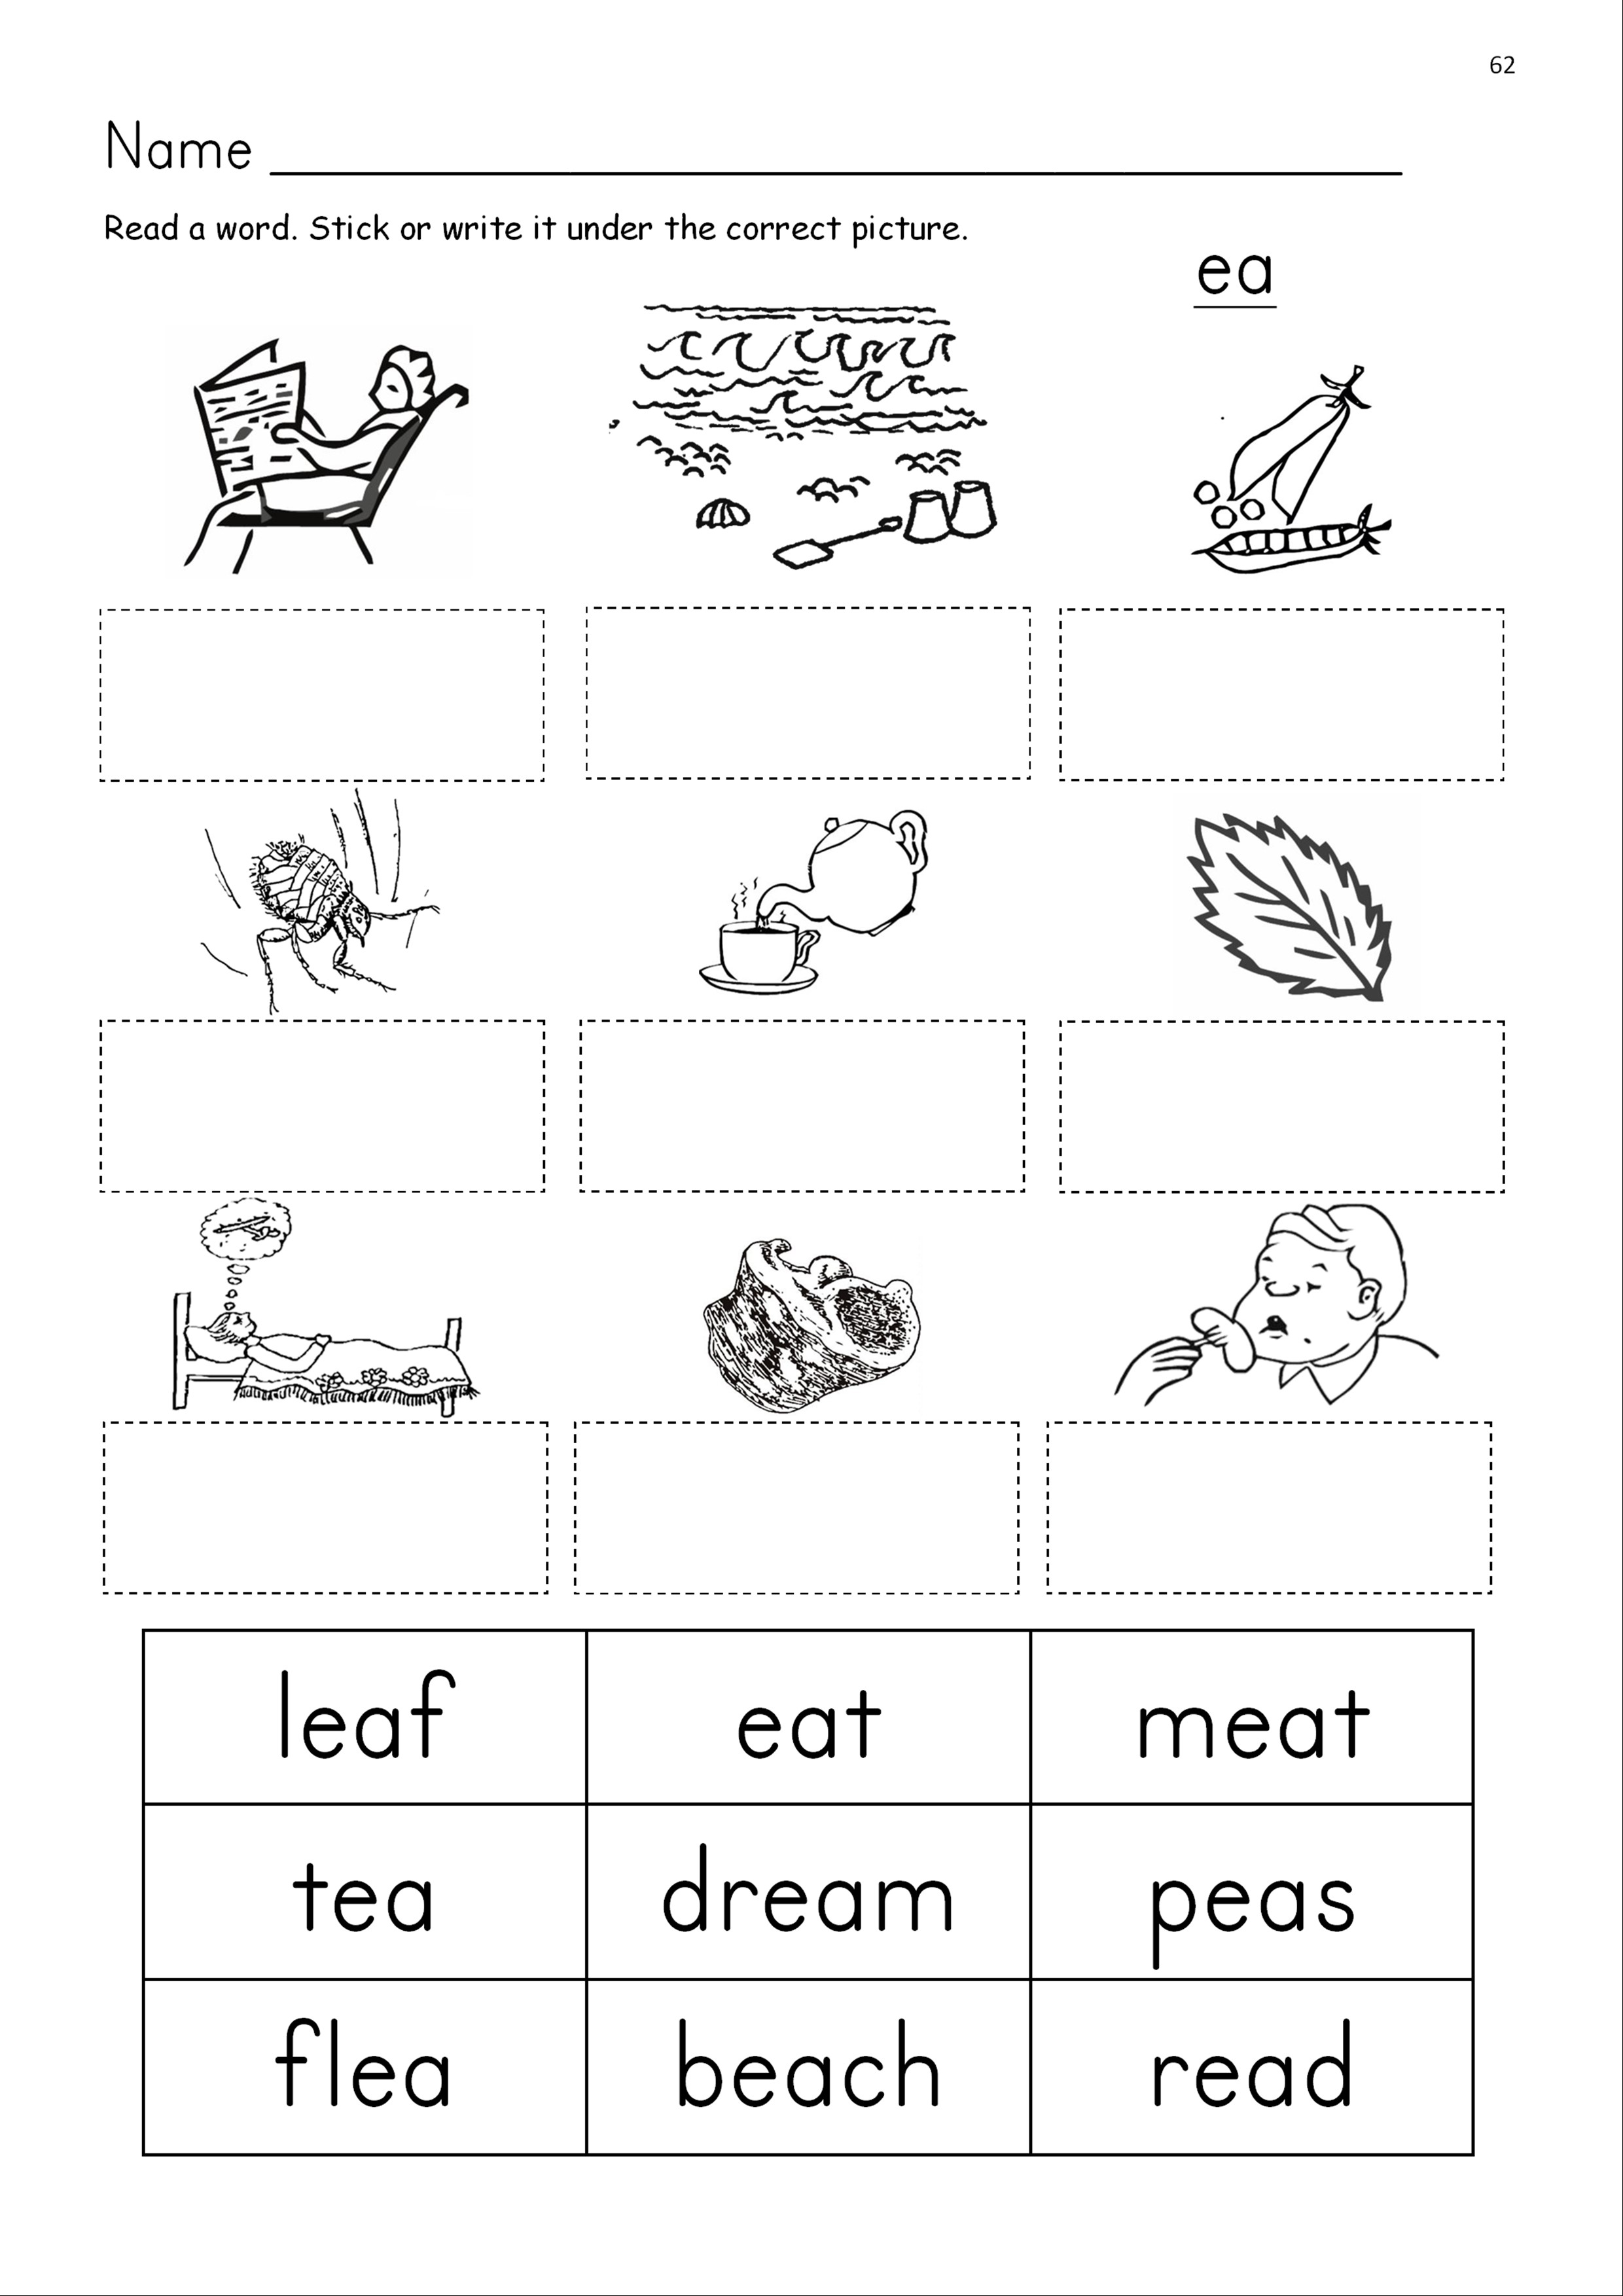 ea-digraph-worksheets-free-download-gambr-co